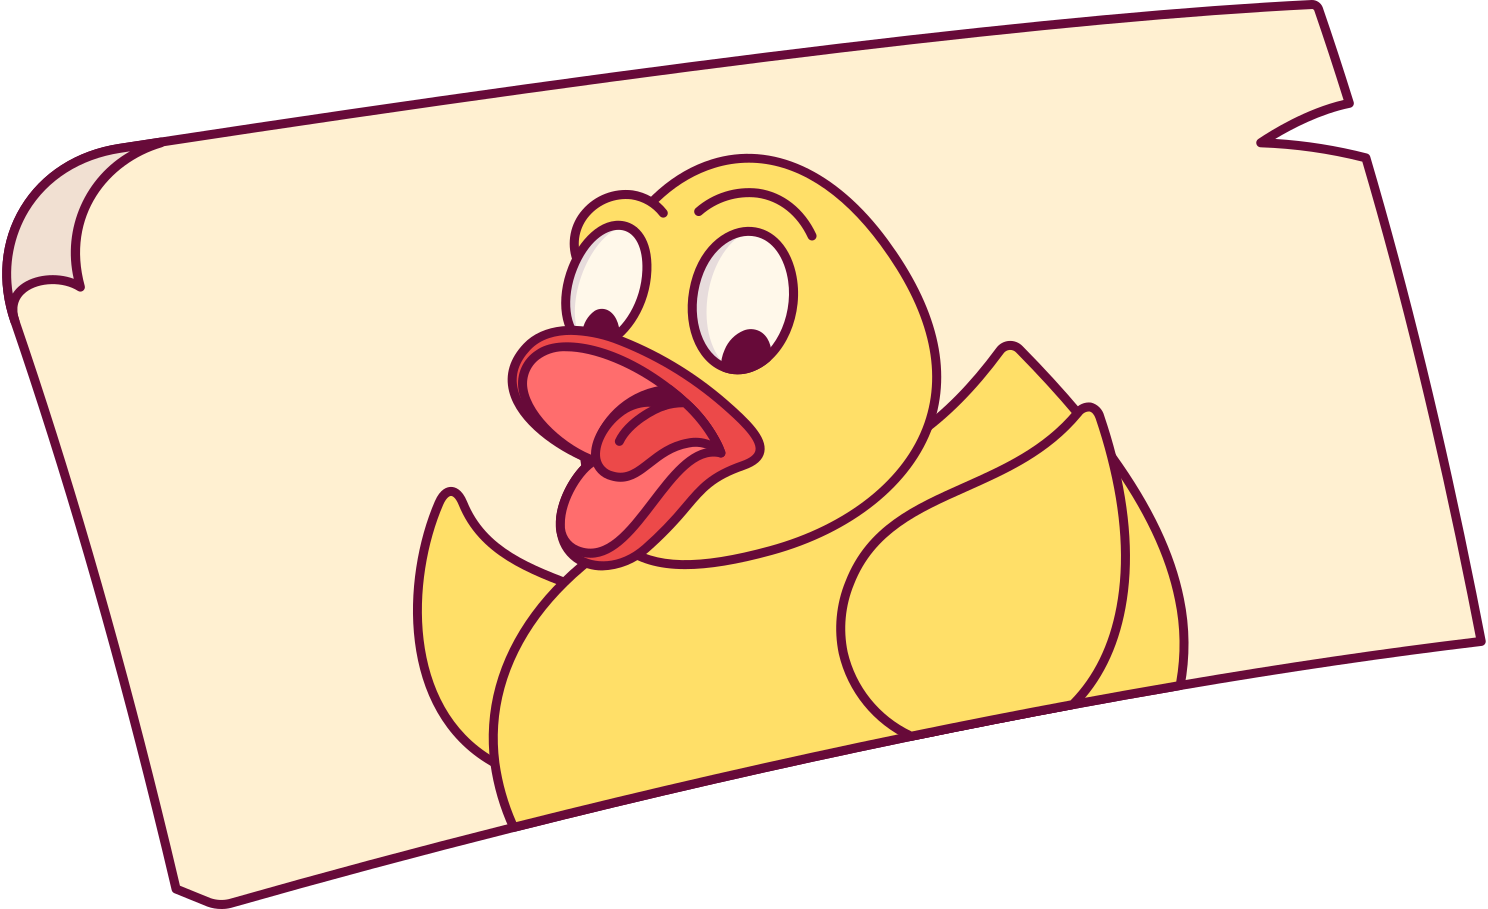 the painted duckling Illustration in PNG, SVG